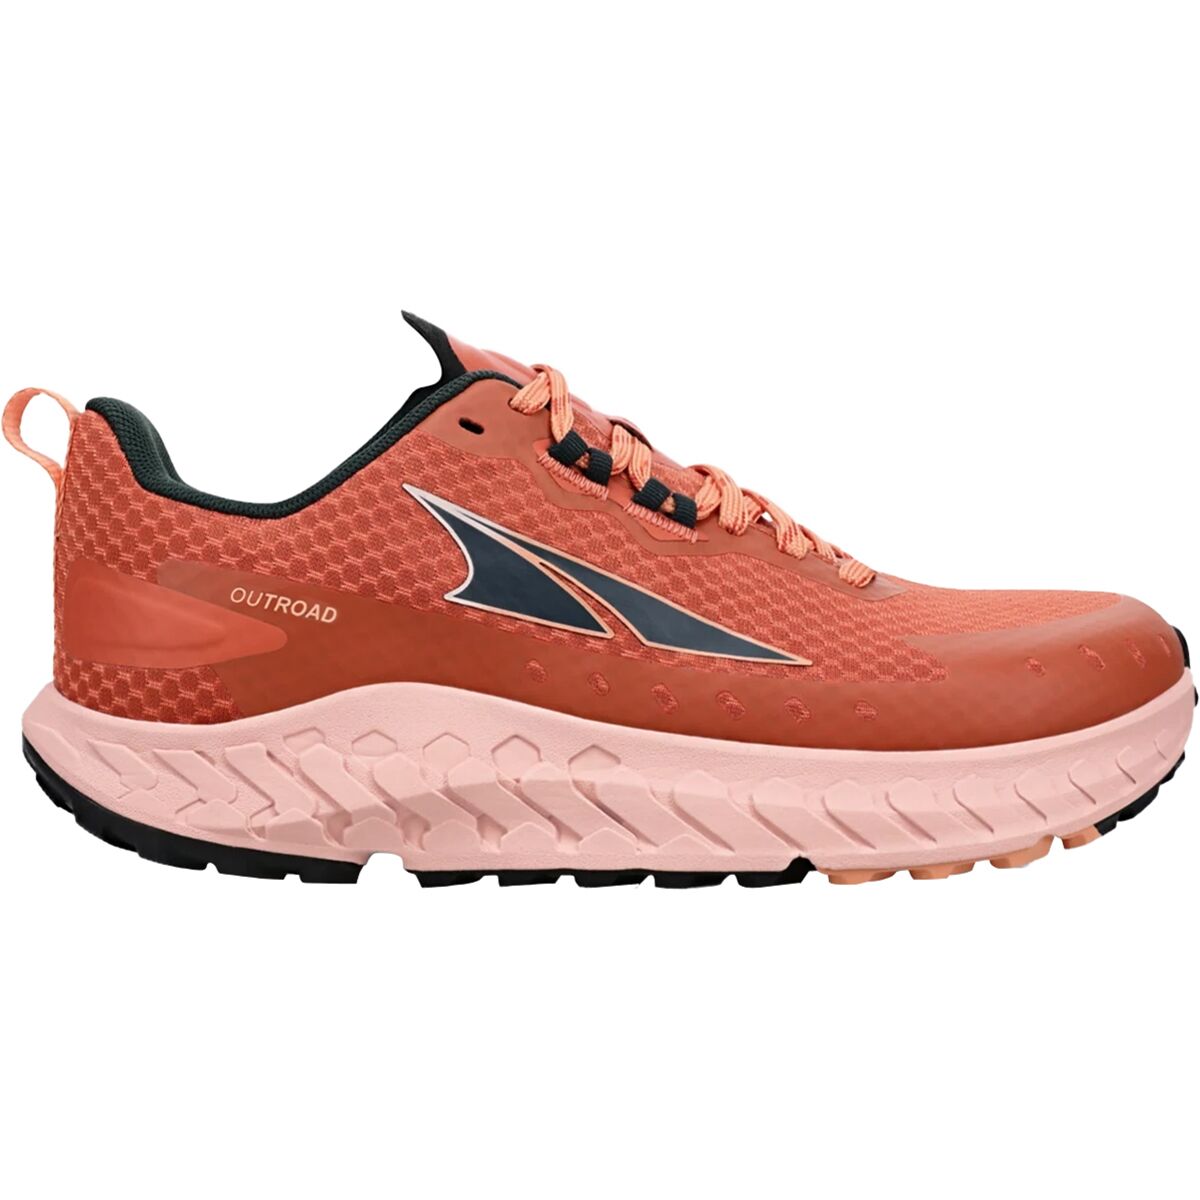 Altra Outroad Trail Running Shoe - Women's